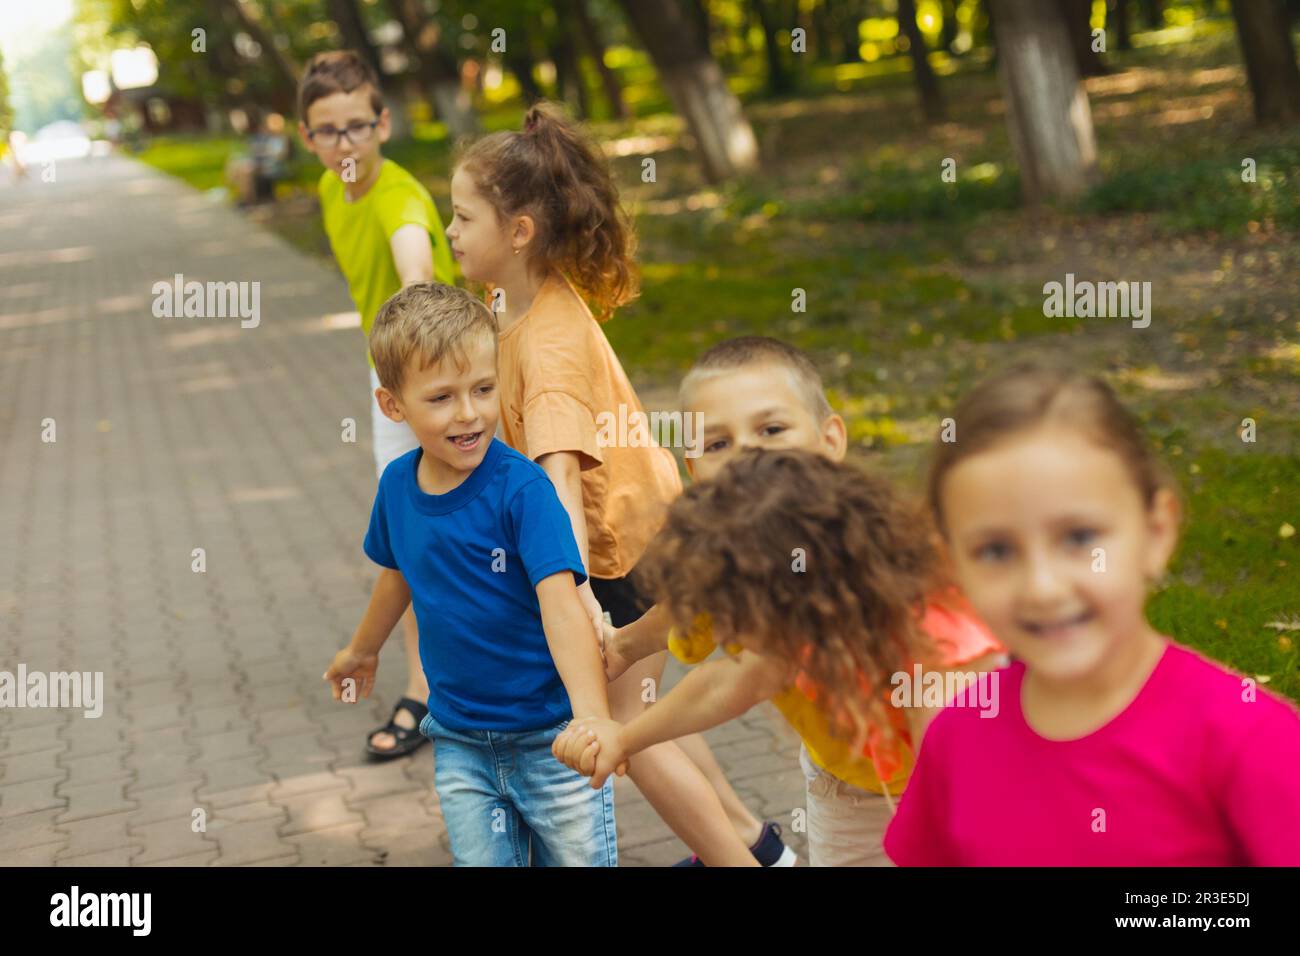 Cute boy playing with friends outdoors in the park Stock Photo